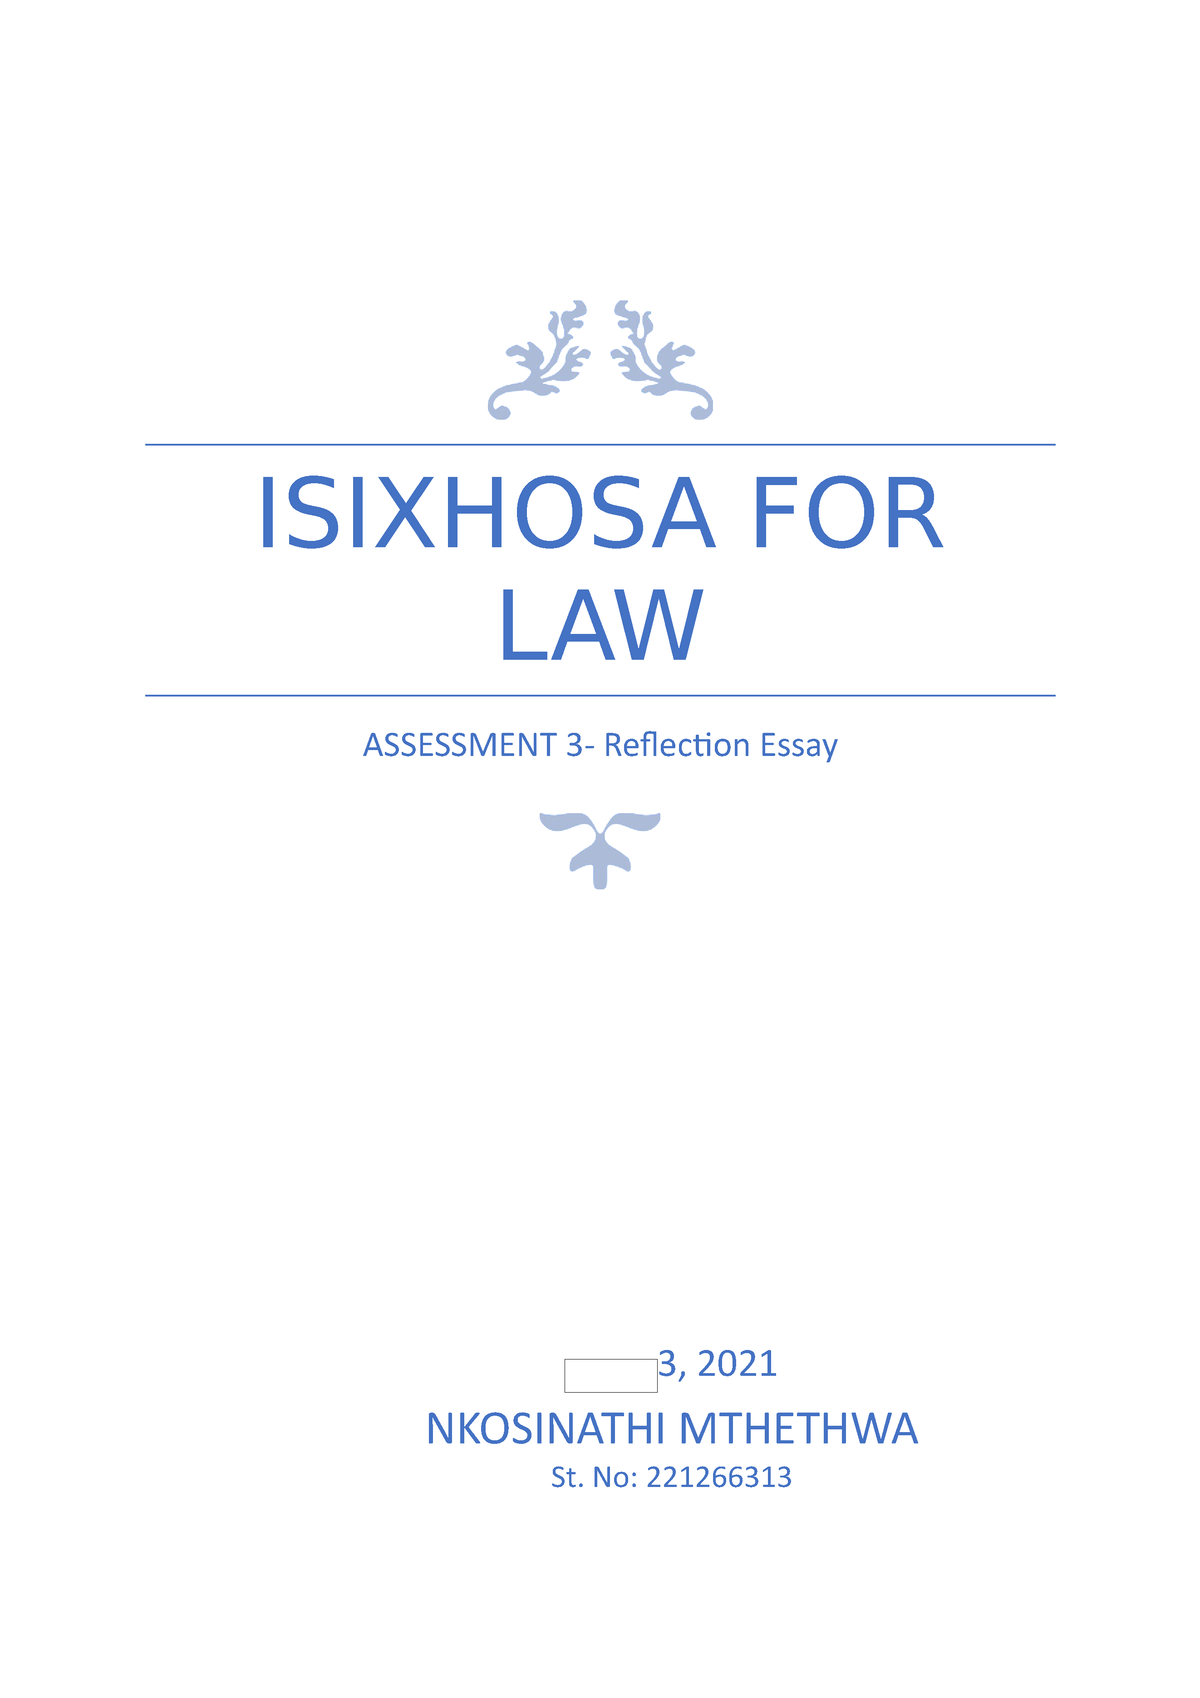 how to write an essay in isixhosa